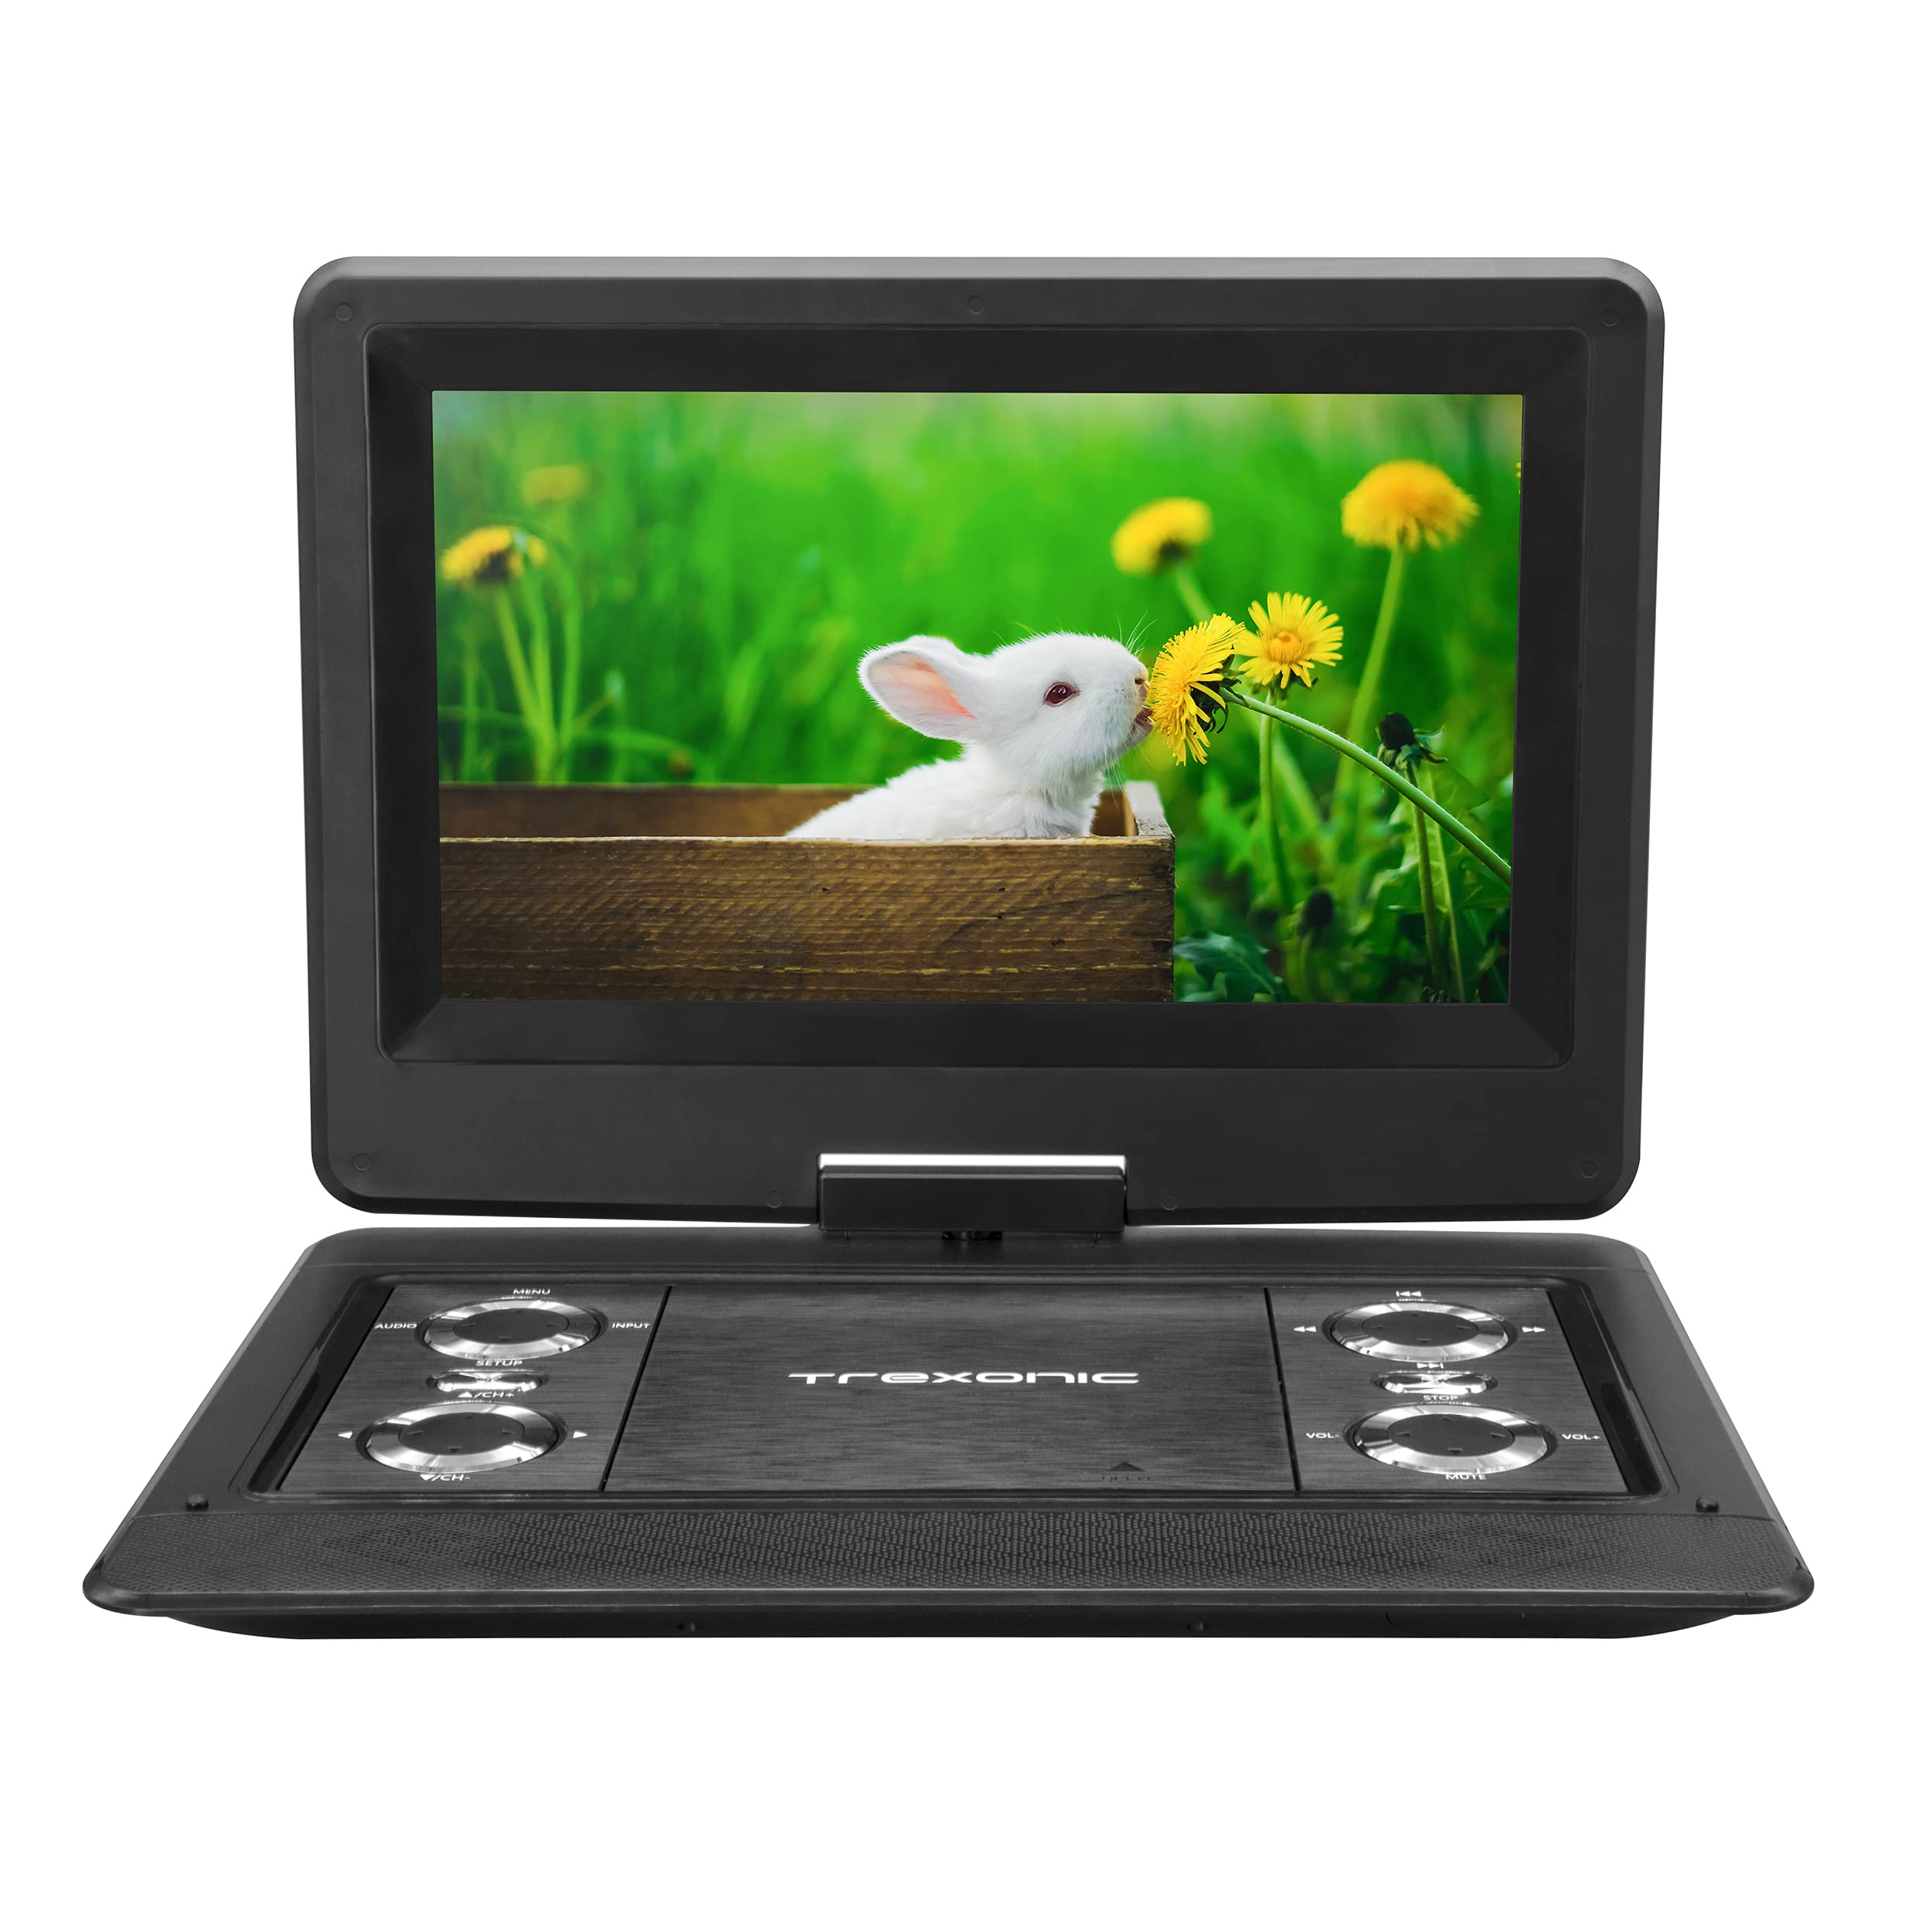 Trexonic 12.5 Inch Portable TV+DVD Player with Color TFT LED Screen and USB/HD/AV Inputs